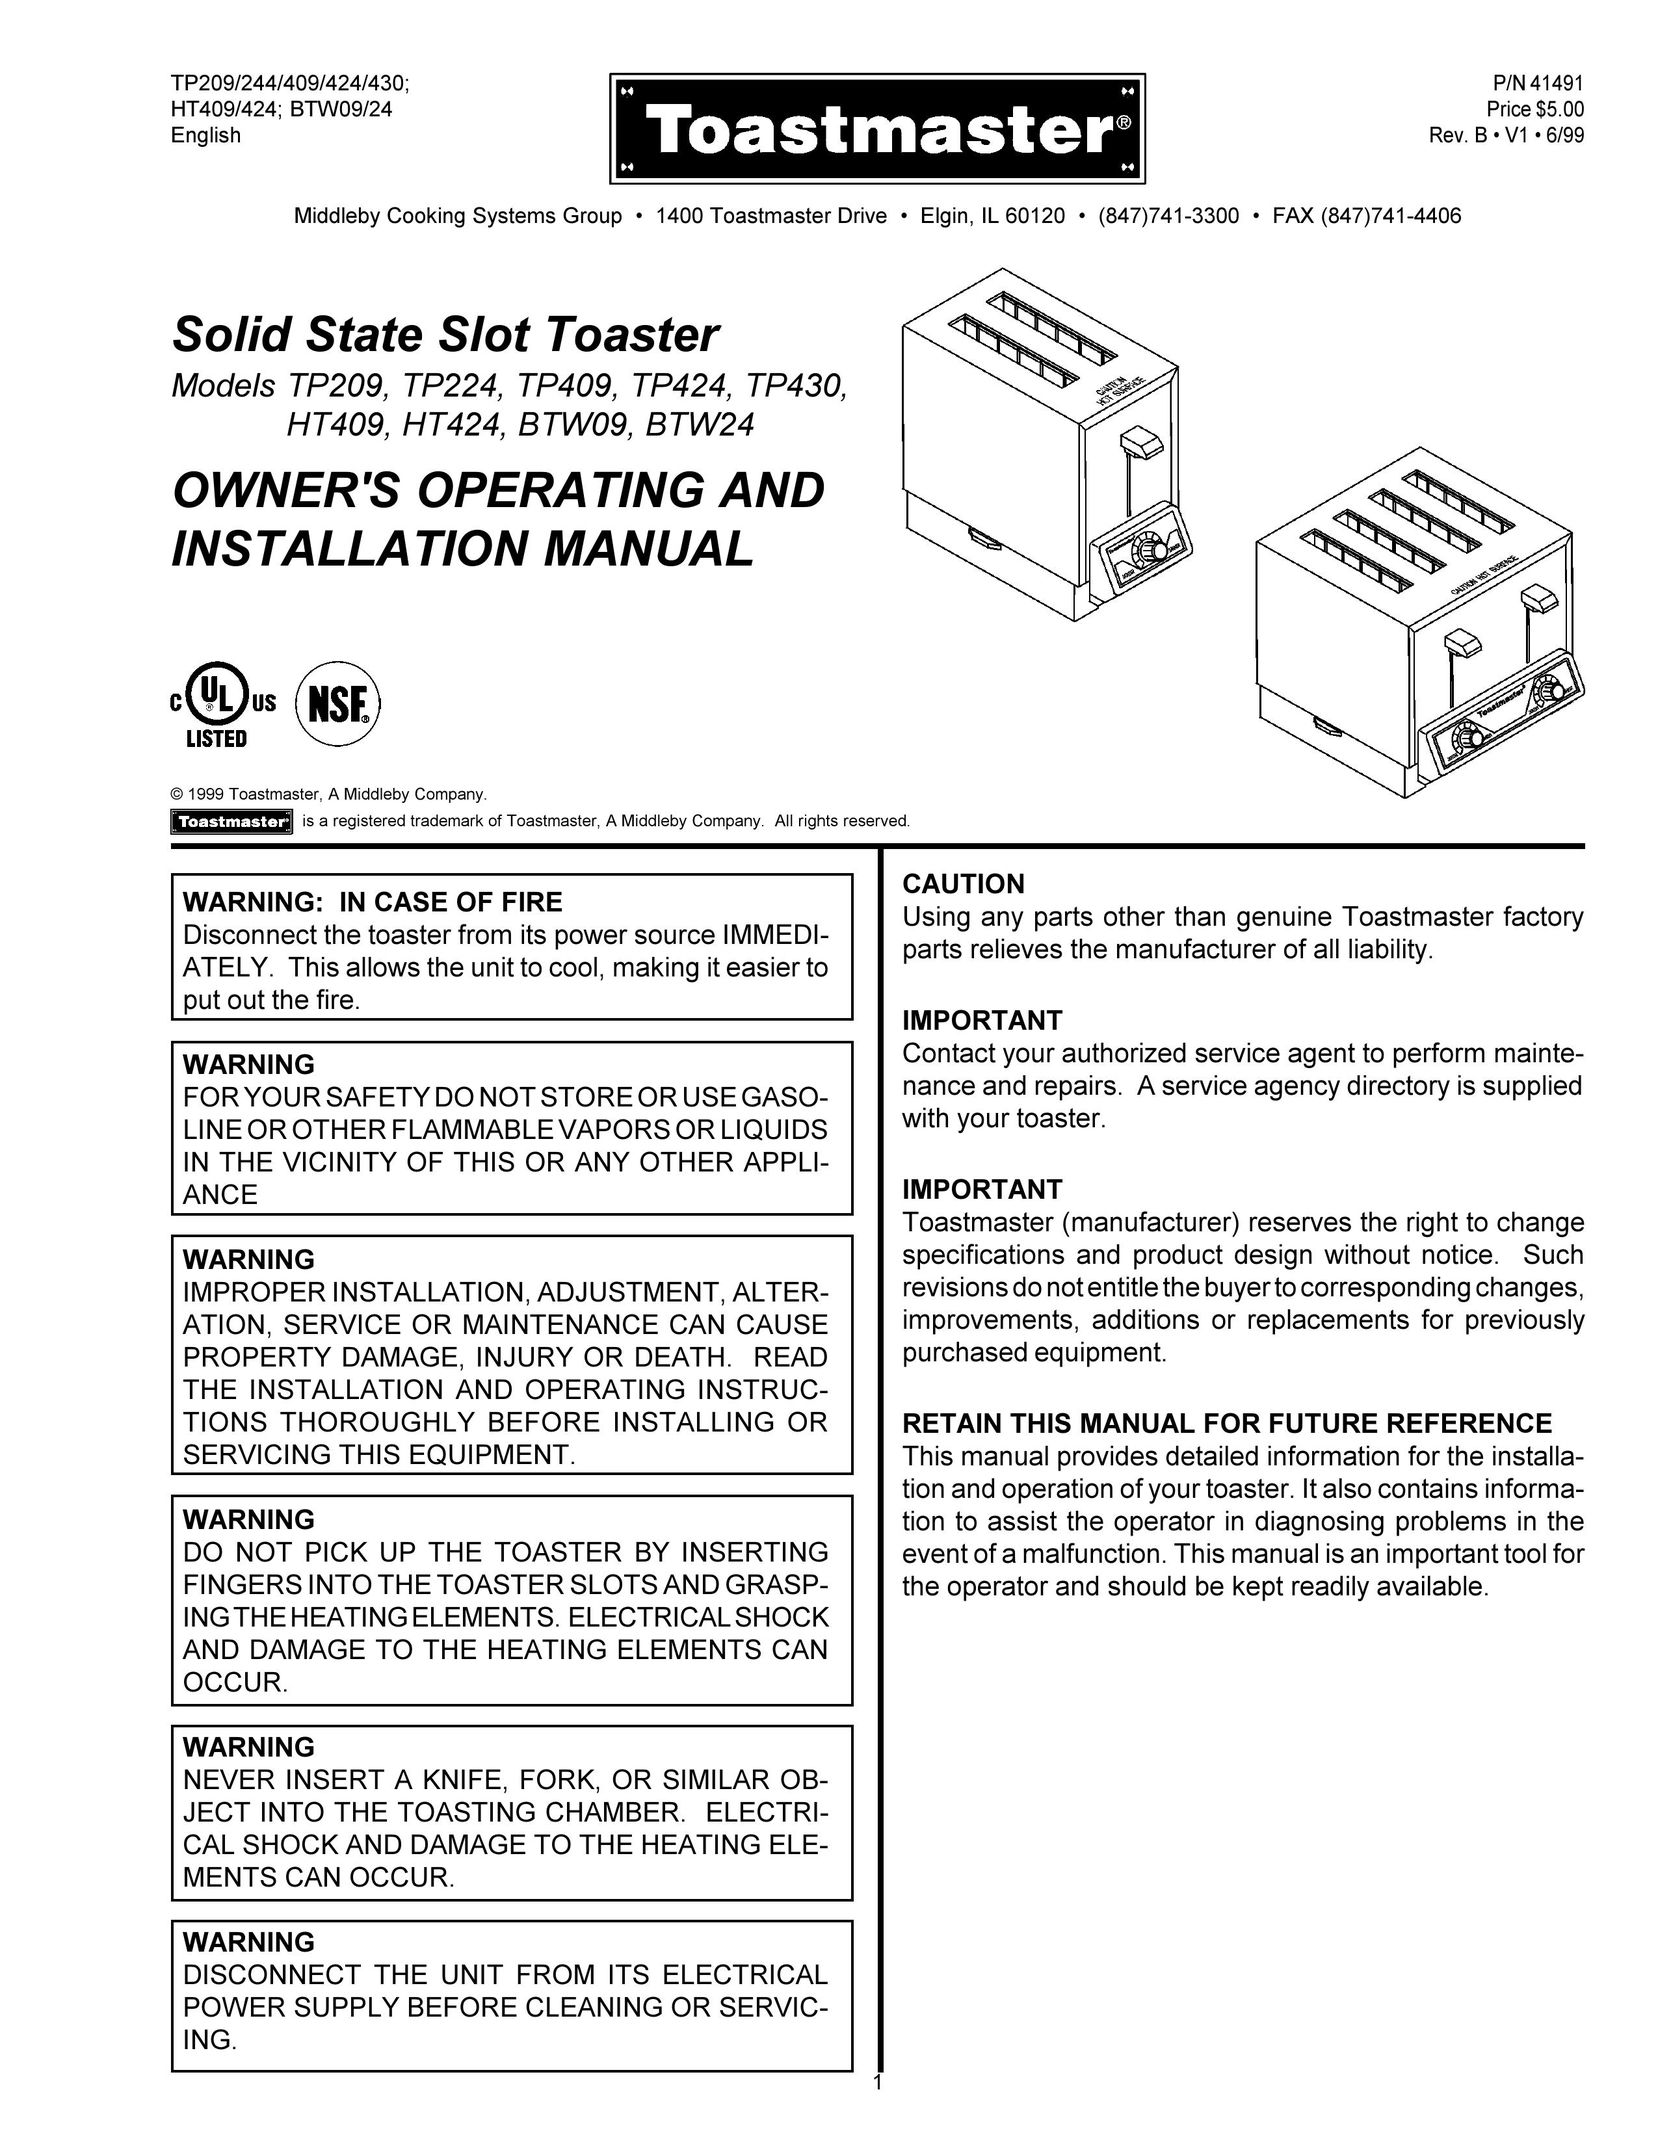 Toastmaster HT409 Car Stereo System User Manual